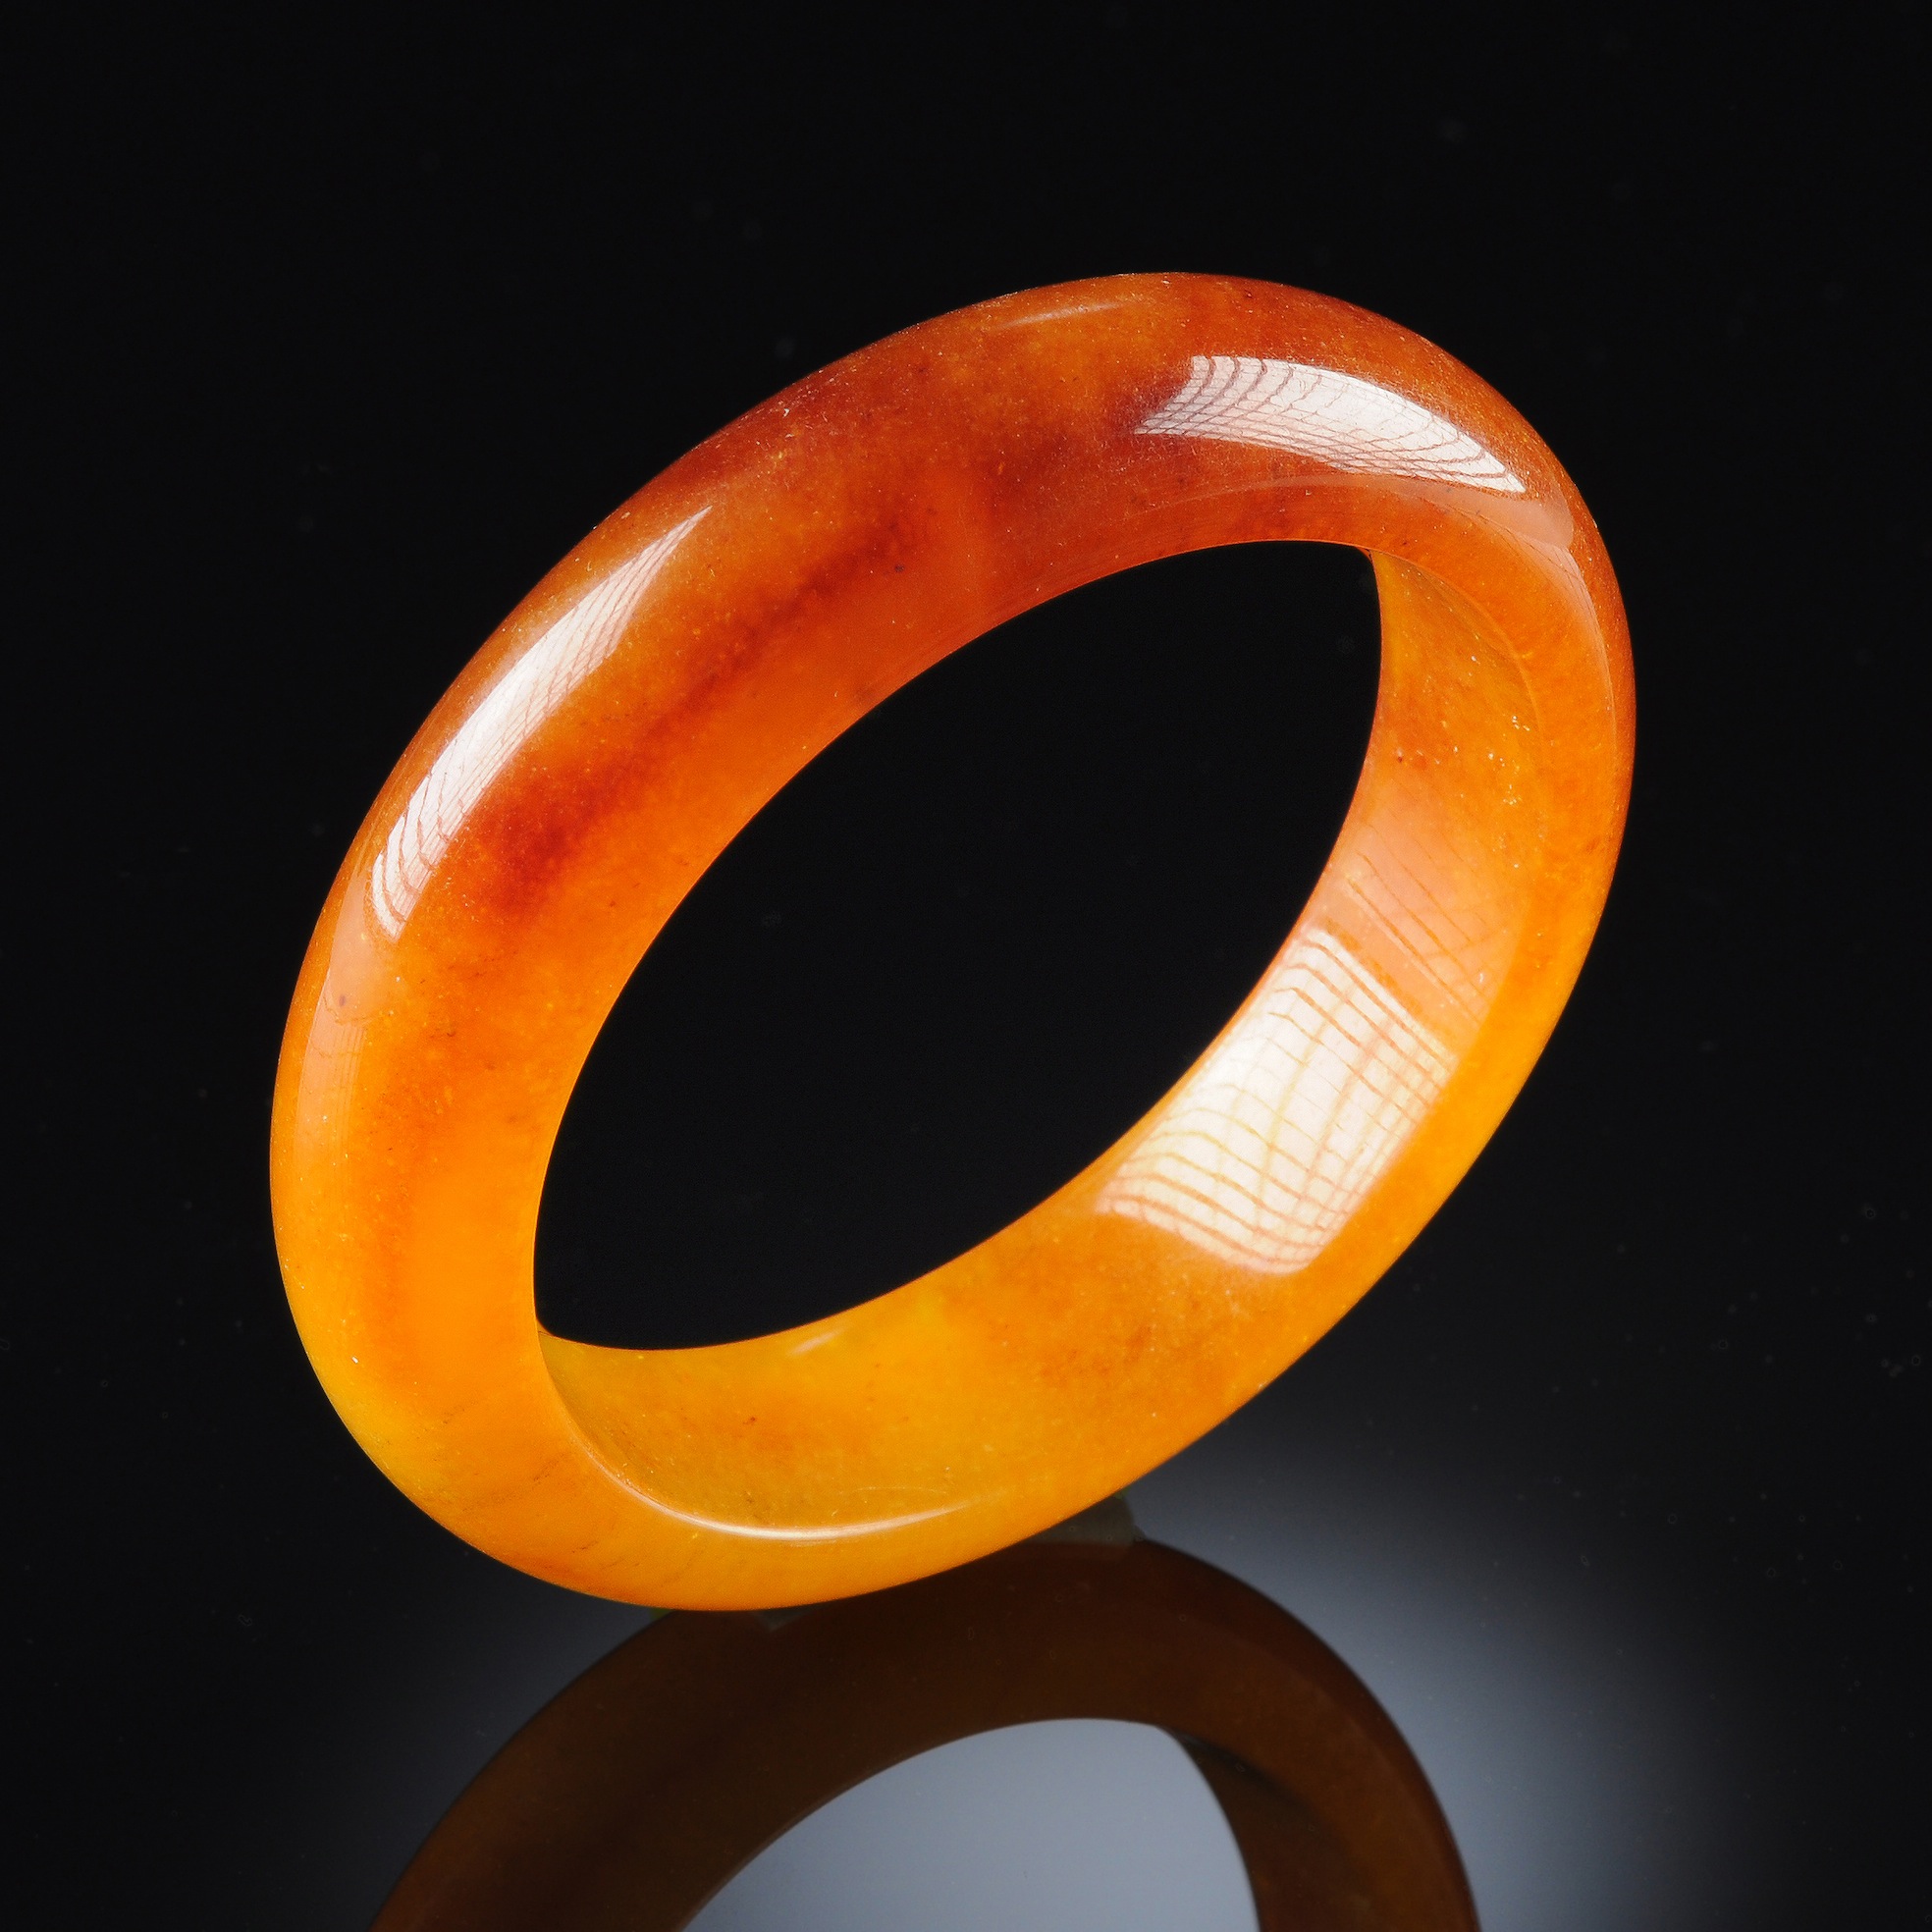 A CHINESE CARVED AMBER JADEITE BANGLE BRACELET, of circular form with pale mustard tones shading